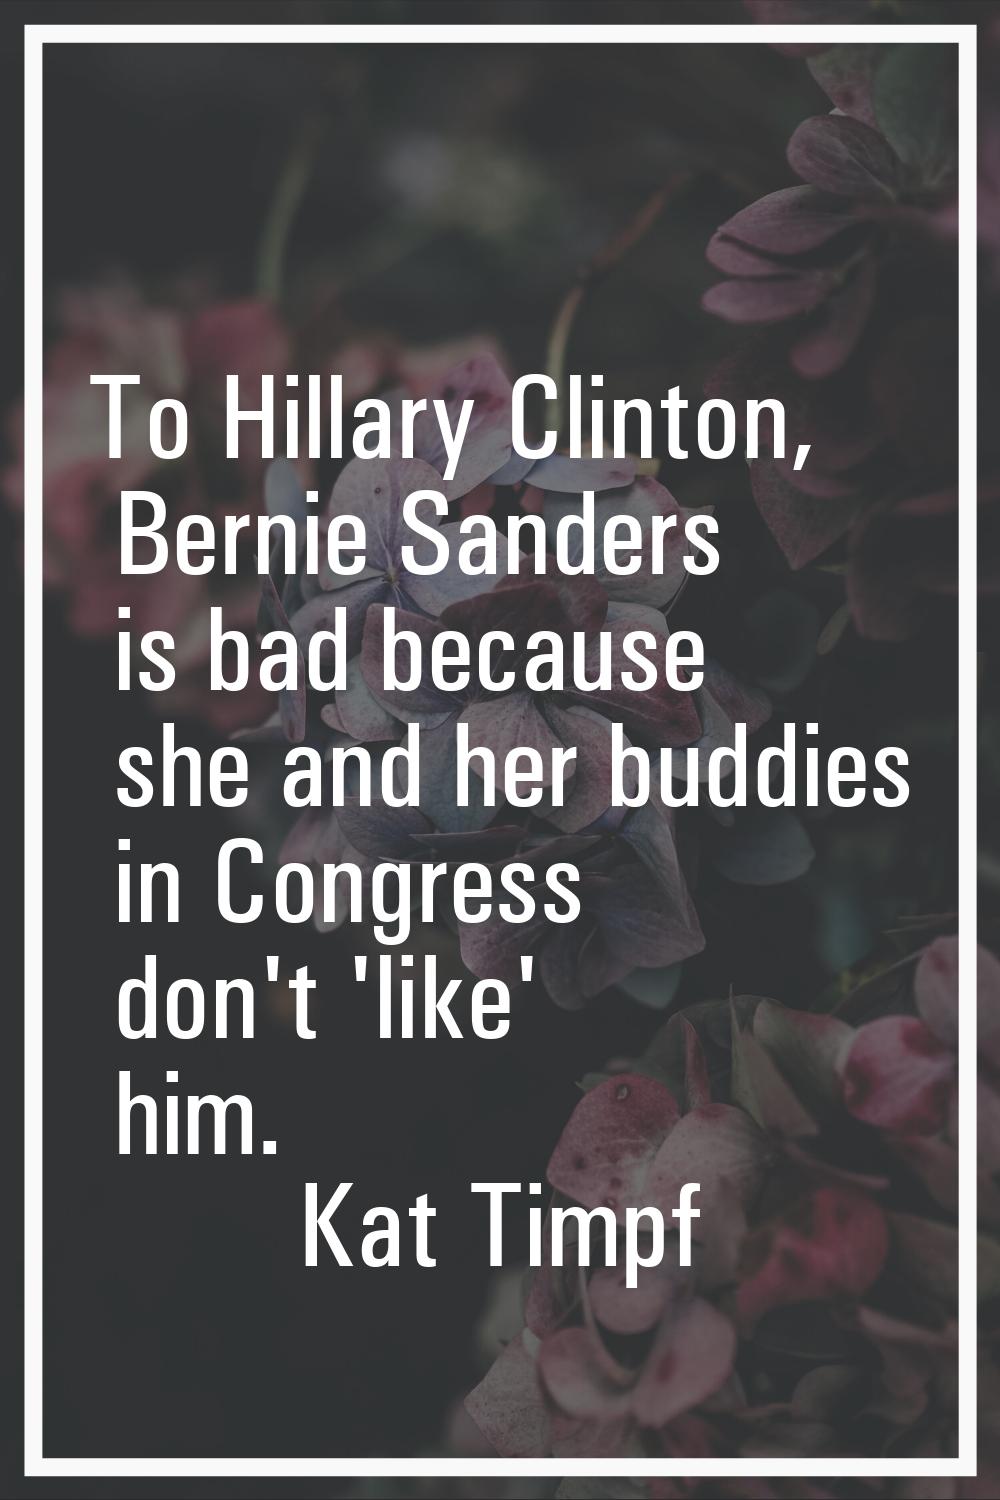 To Hillary Clinton, Bernie Sanders is bad because she and her buddies in Congress don't 'like' him.